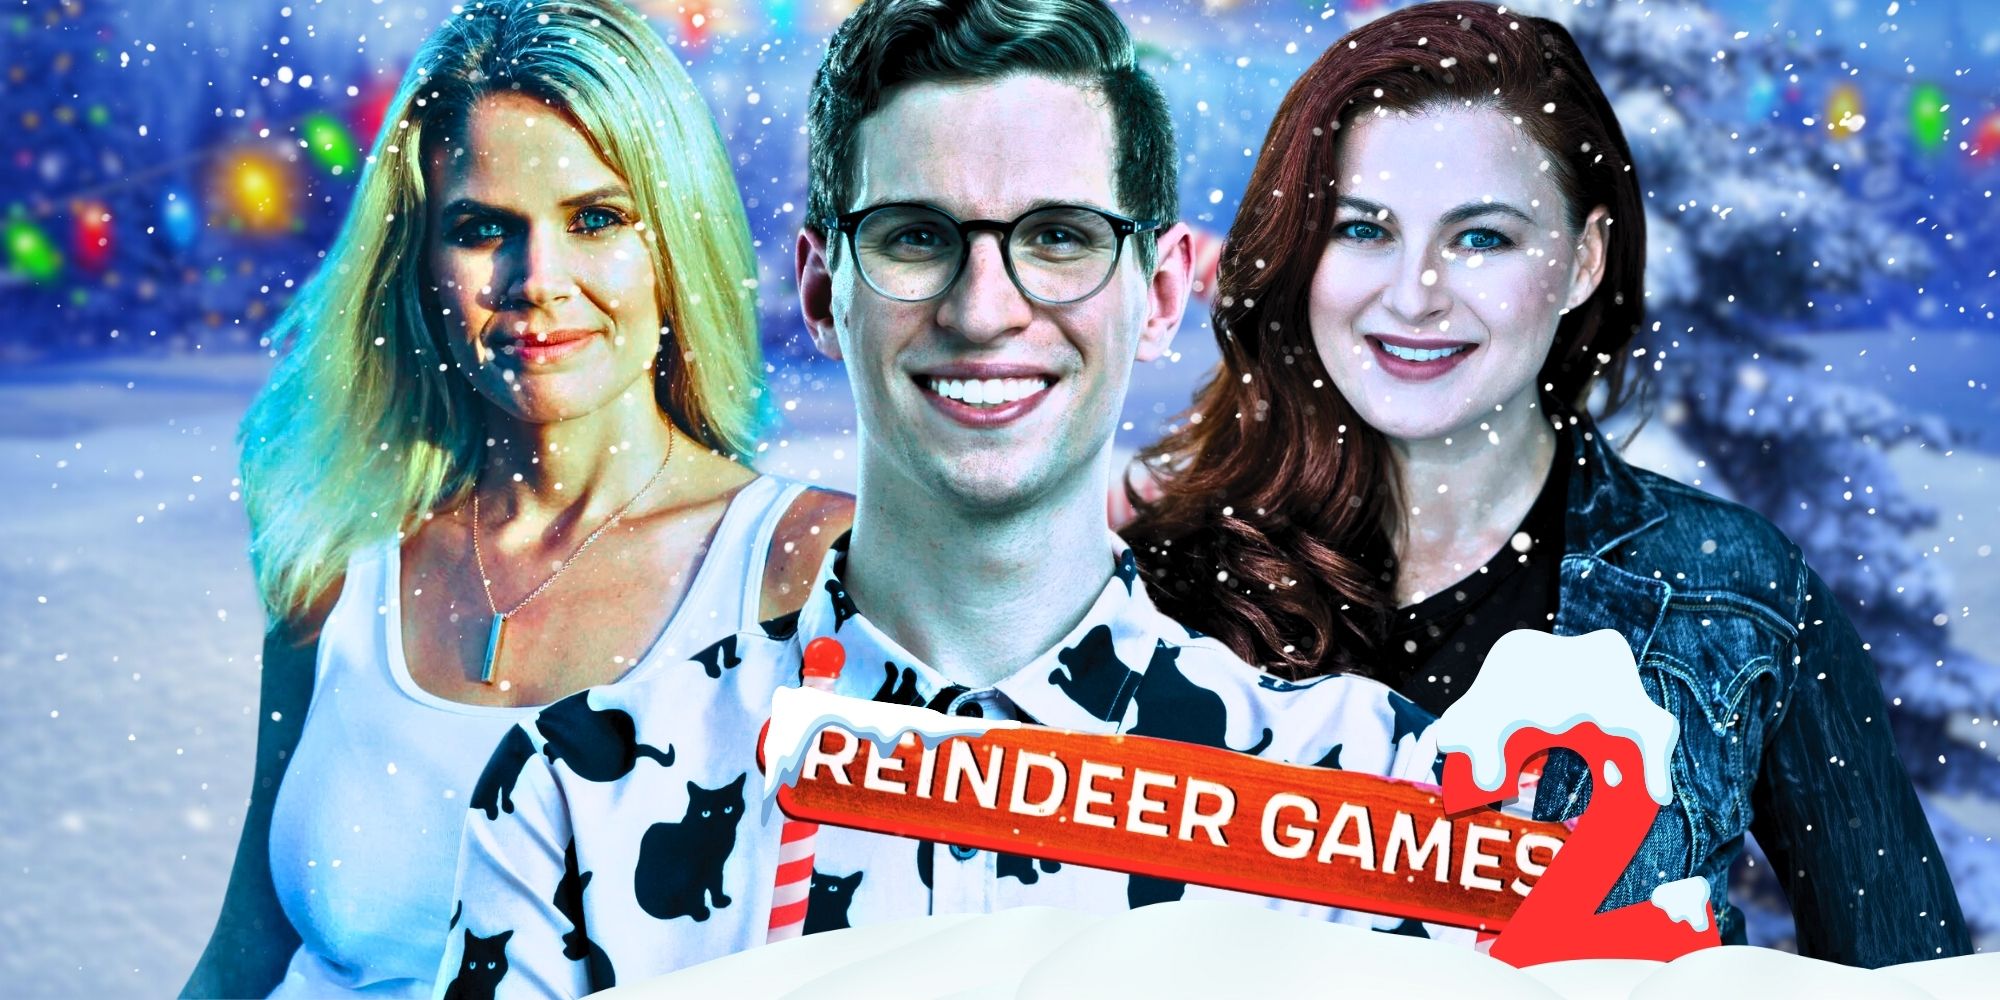 Big Brother Reindeer Games' Cast: Meet the Former Players Competing